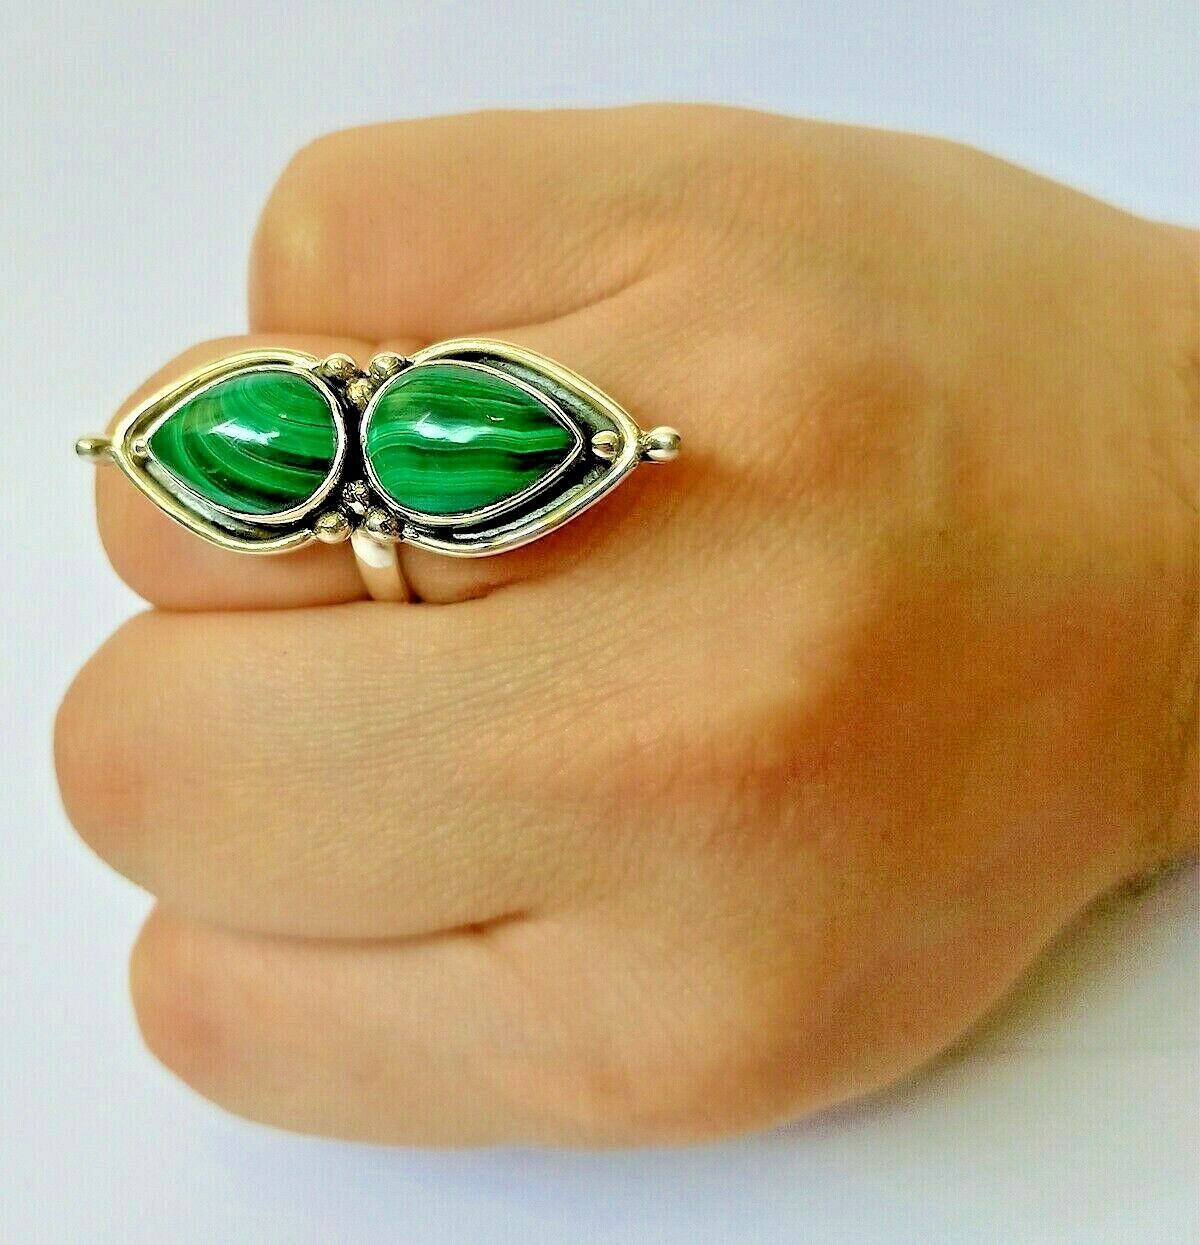 Malachite 925 Solid Sterling Silver Handmade Ring Size 3 to 14 US (US-MAL-003)